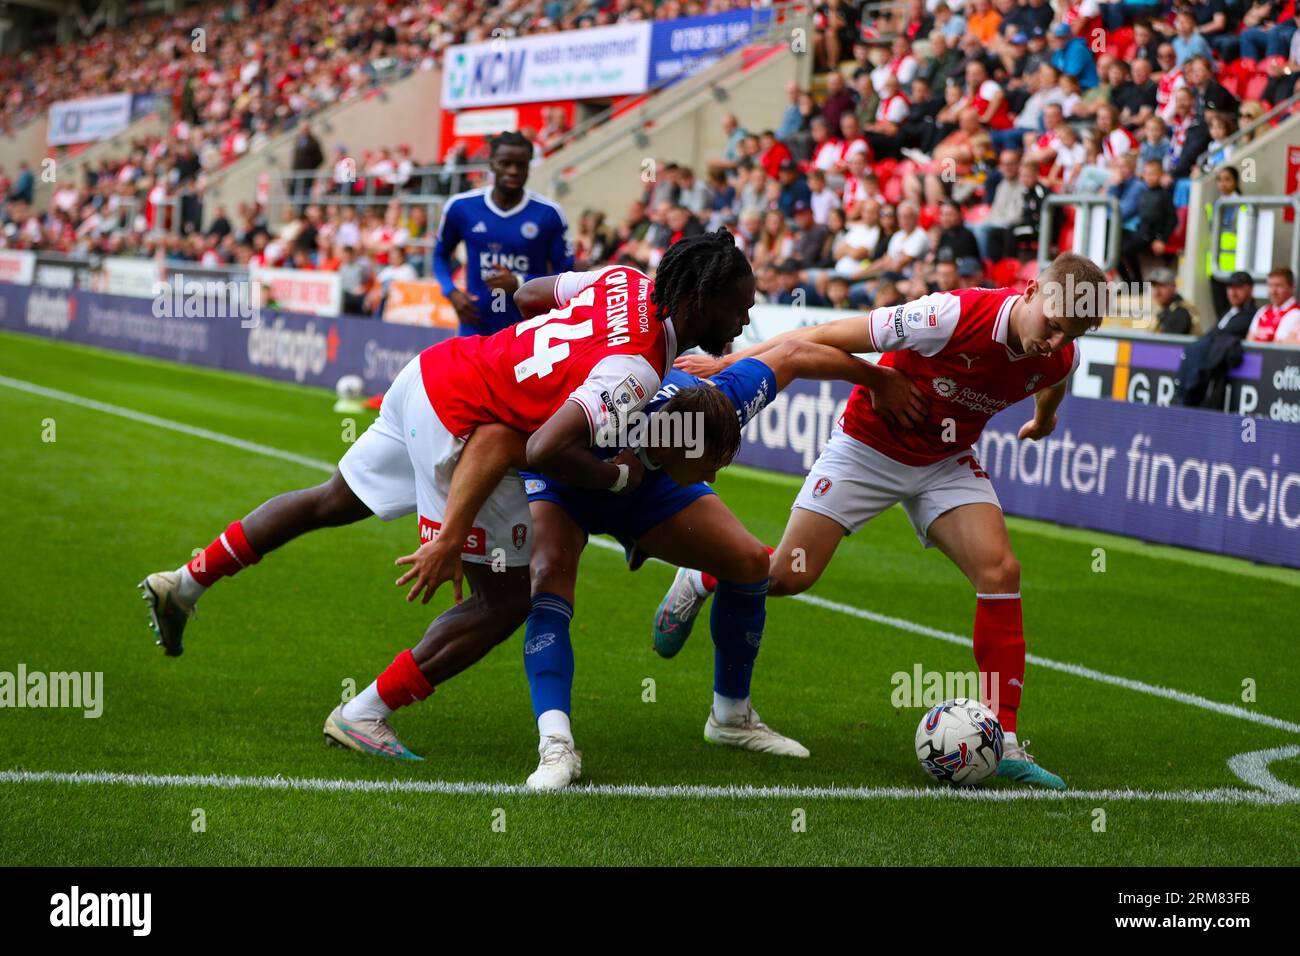 AESSEAL New York Stadium, Rotherham, England - 26th August 2023 Callum Doyle (5) of Leicester City shields the ball from Fred Onyedinma (14) of Rotherham United and Ciaran McGuckin (35) of Rotherham United - during the game Rotherham United v Leicester City, Sky Bet Championship,  2023/24, AESSEAL New York Stadium, Rotherham, England - 26th August 2023 Credit: Mathew Marsden/WhiteRosePhotos/Alamy Live News Stock Photo